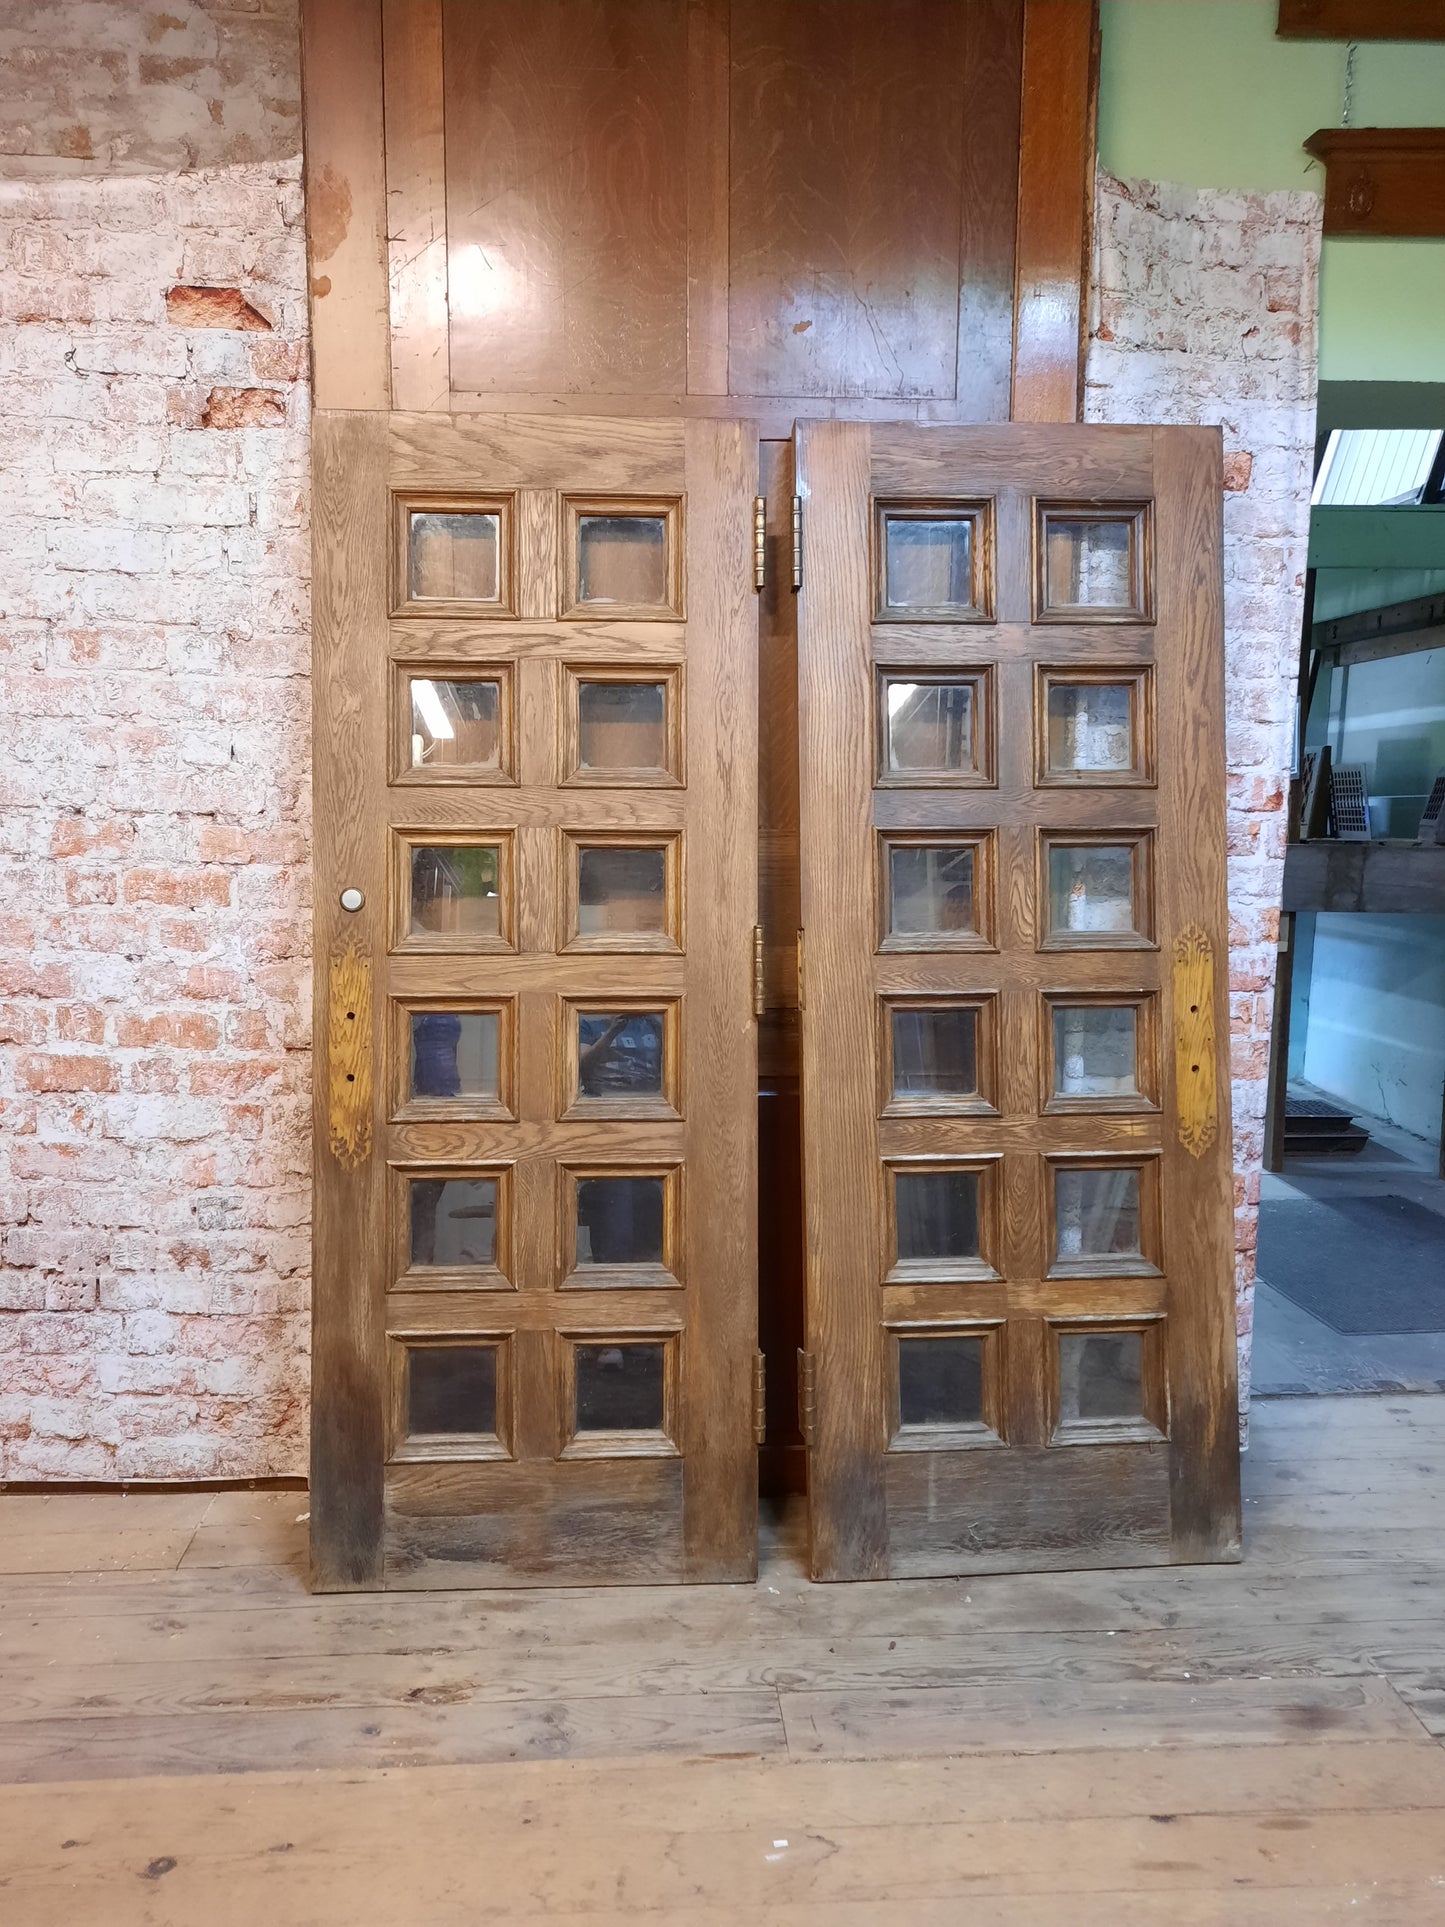 Large Vintage Wood and Glass Church Doors, Double Glass Entry Doors, Heavy Glass Church Doors